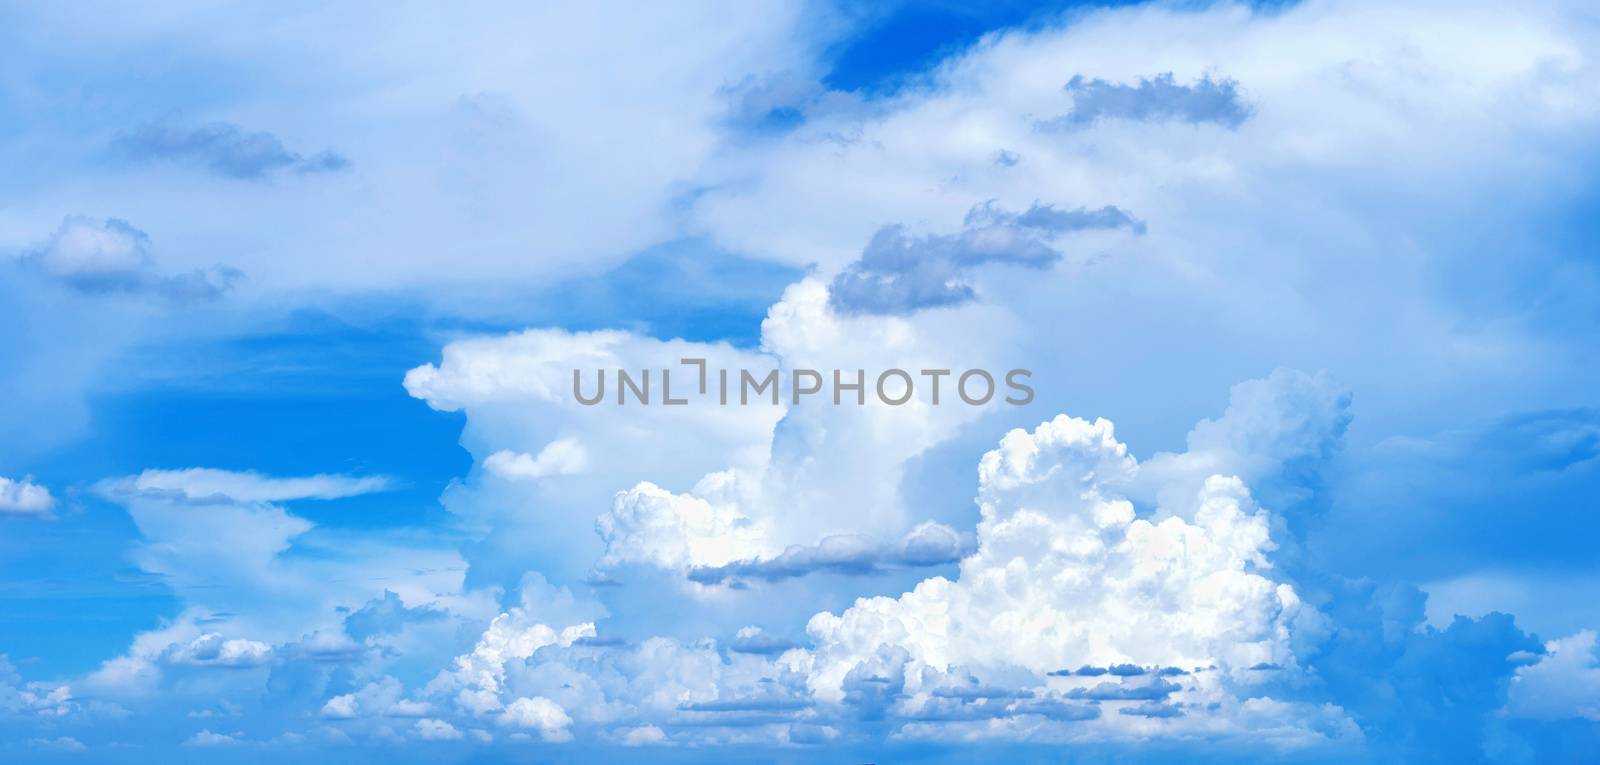 Blue sky with clouds, Clouds sky background. by gutarphotoghaphy